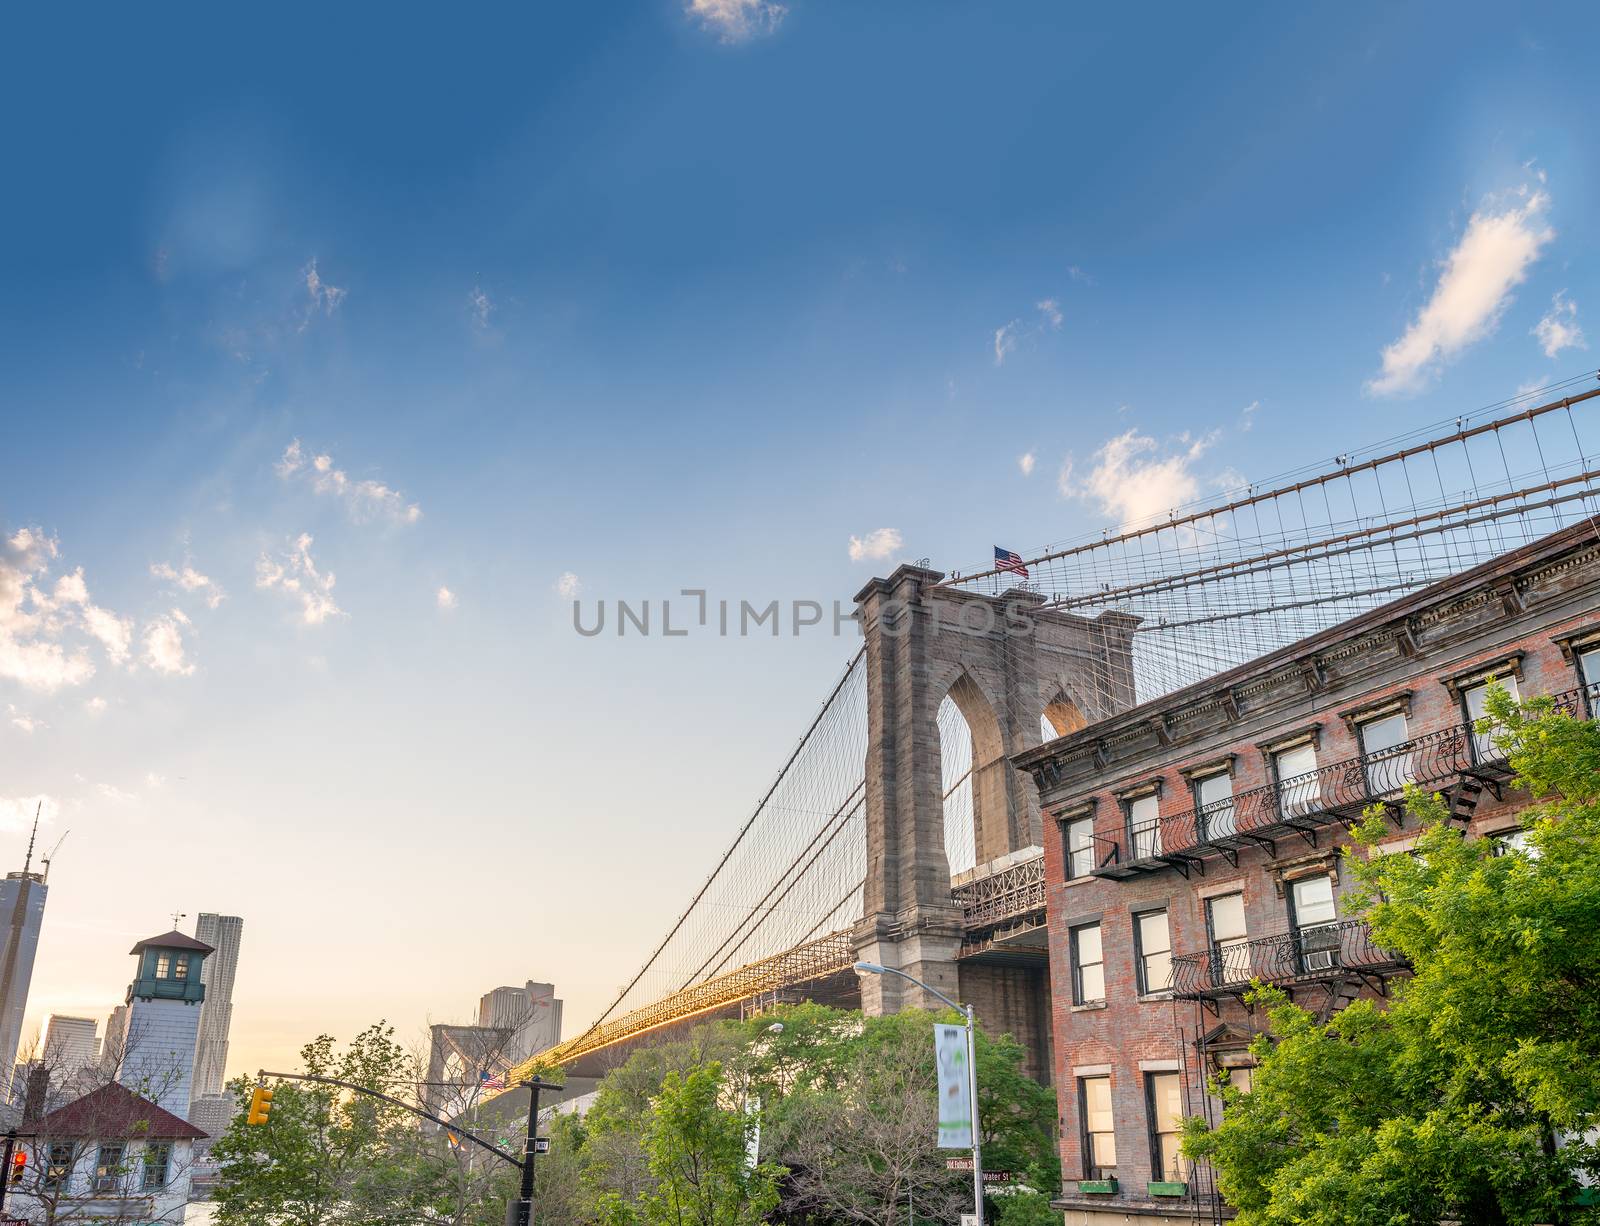 Brooklyn Bridge as seen from Brooklyn streets at sunset time by jovannig